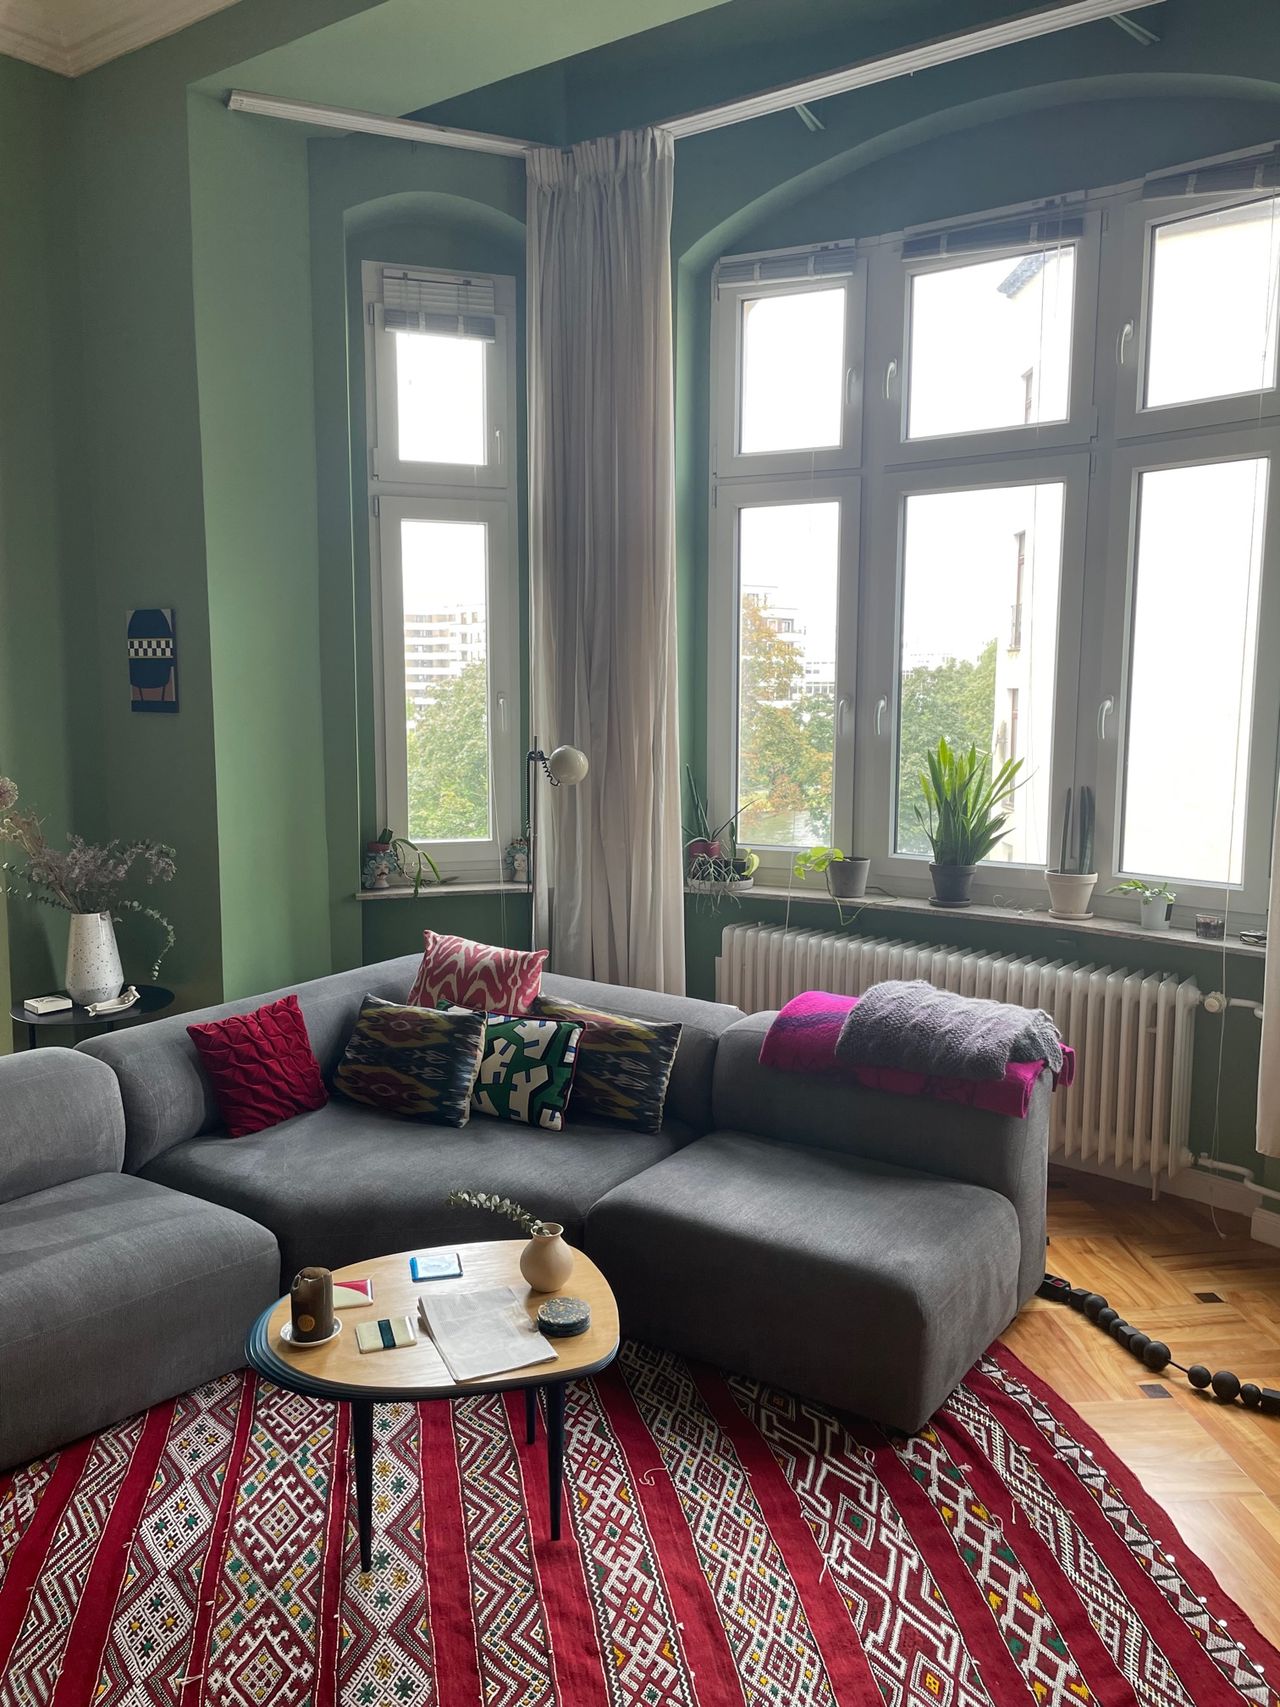 Spacious 19th Century Apartment with Balcony Overlooking the River Spree